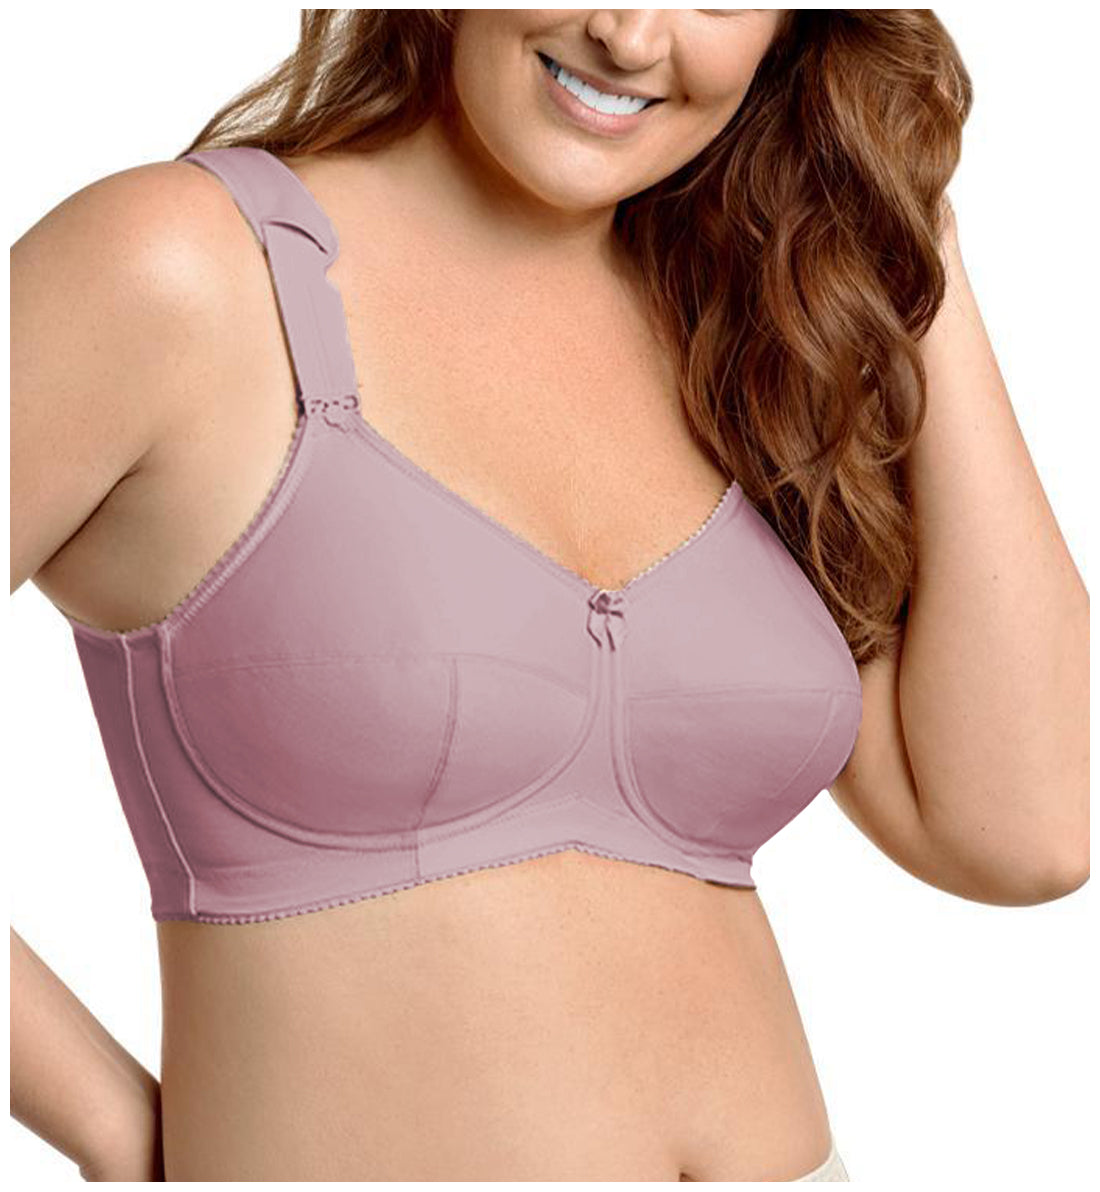 Elila Kaylee 3-Part Cup Full Support Softcup Bra (1505)- Dusty